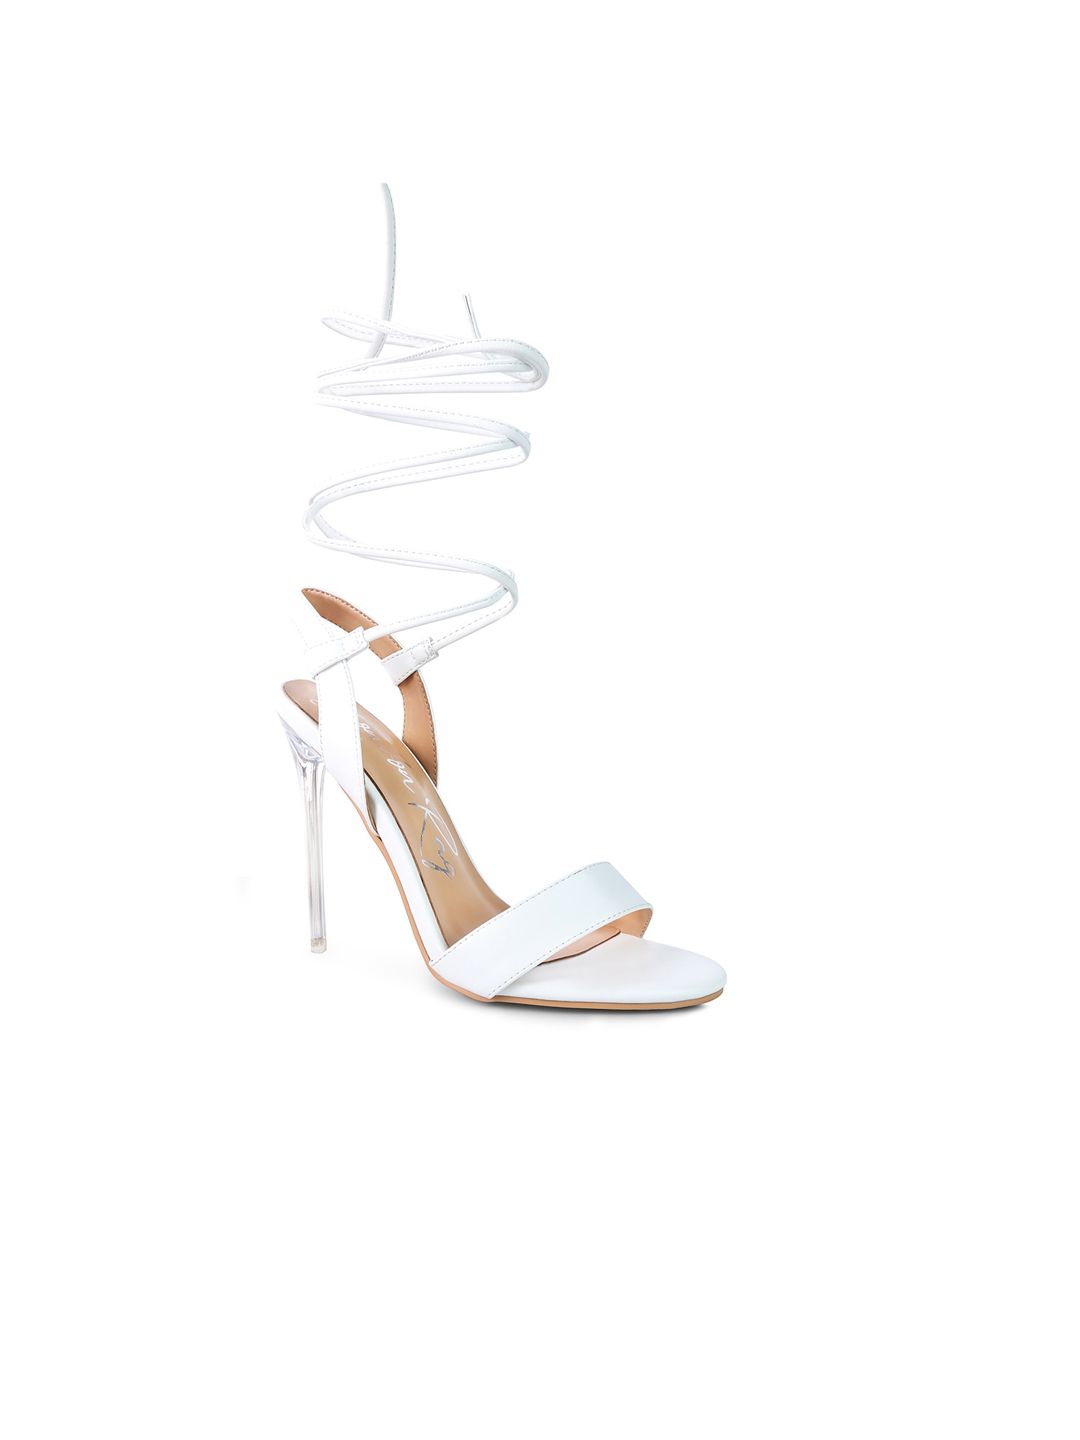 London Rag White PU Party Stiletto Sandals with Buckles Price in India